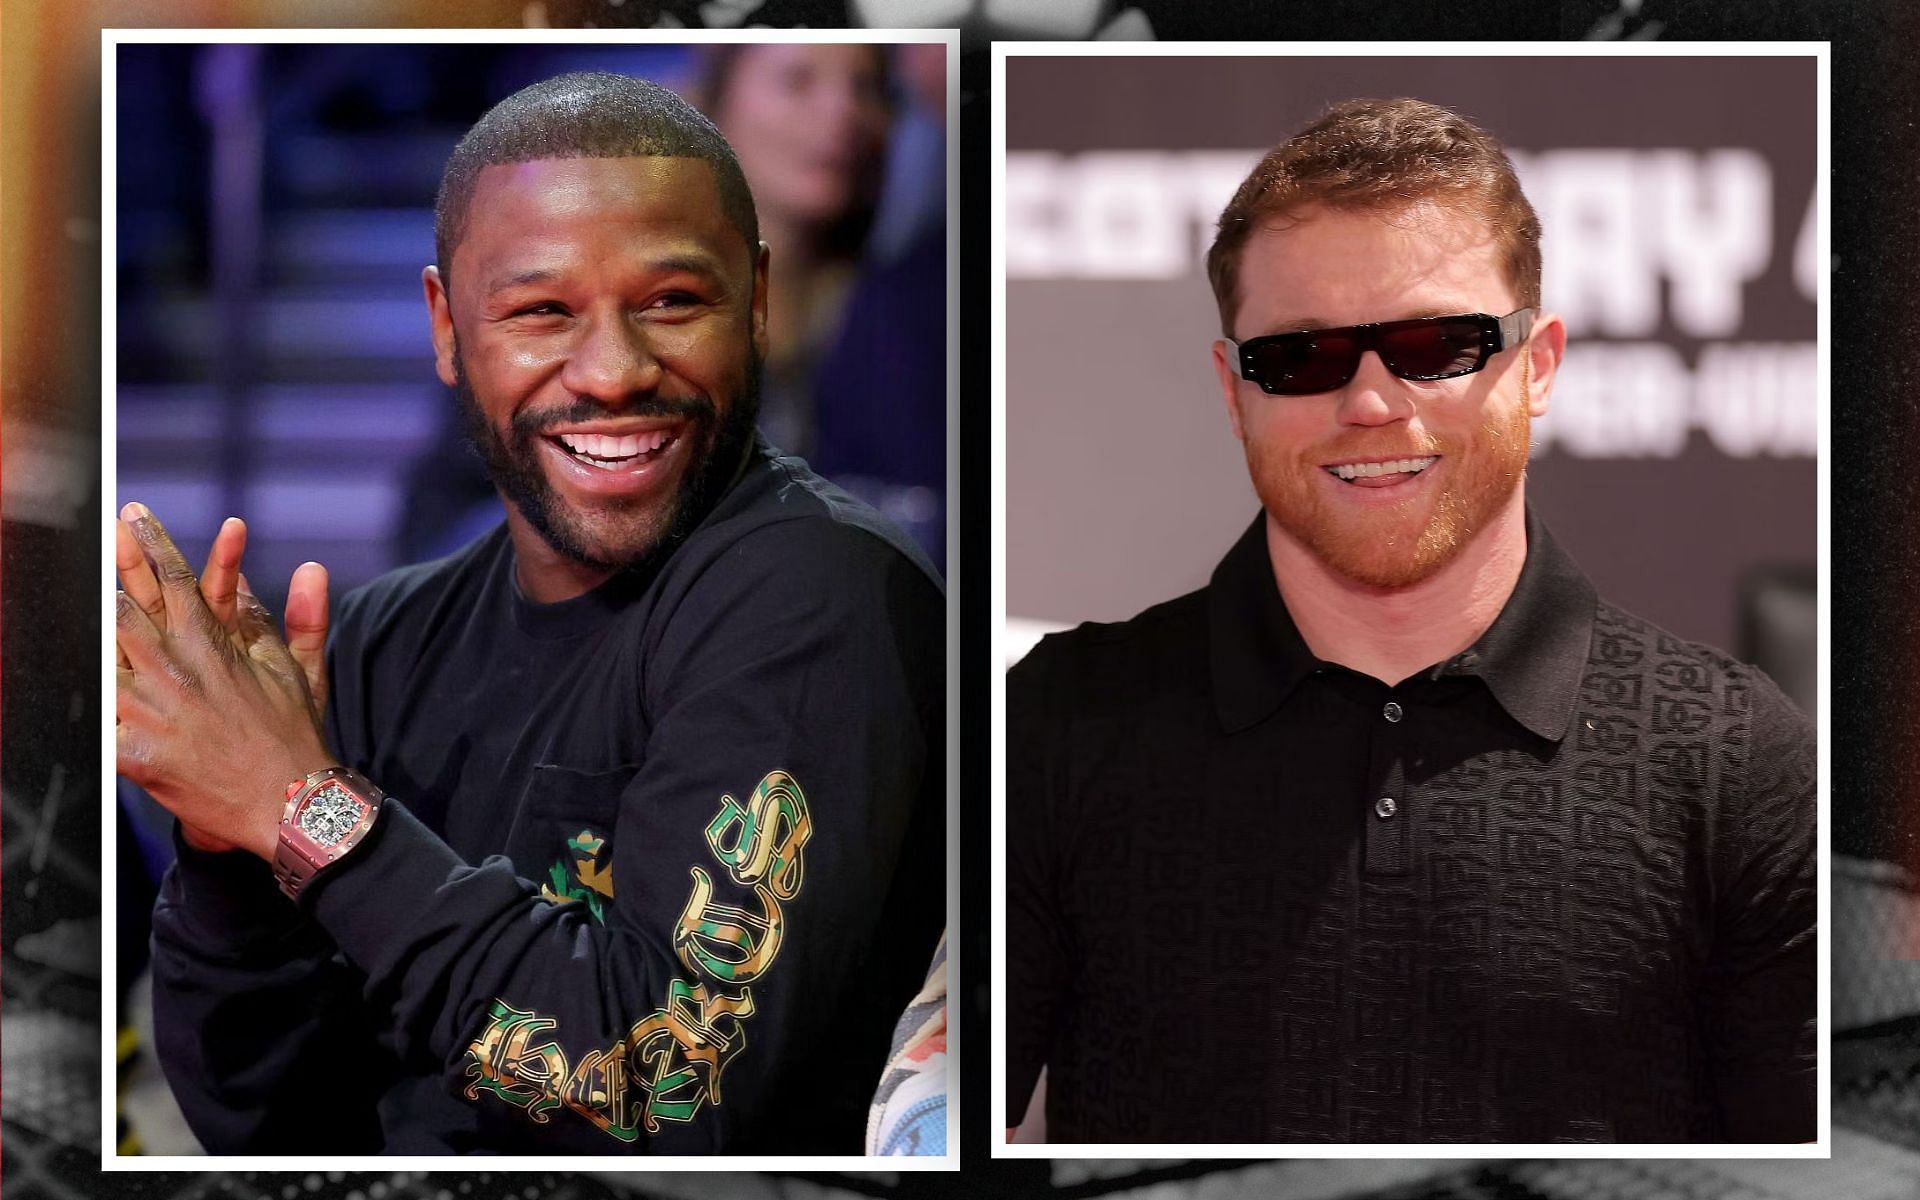 When a ring girl revealed the contrasting personality between Floyd Mayweather (left) and Canelo Alvarez (right). [Image courtesy: Getty Images] 